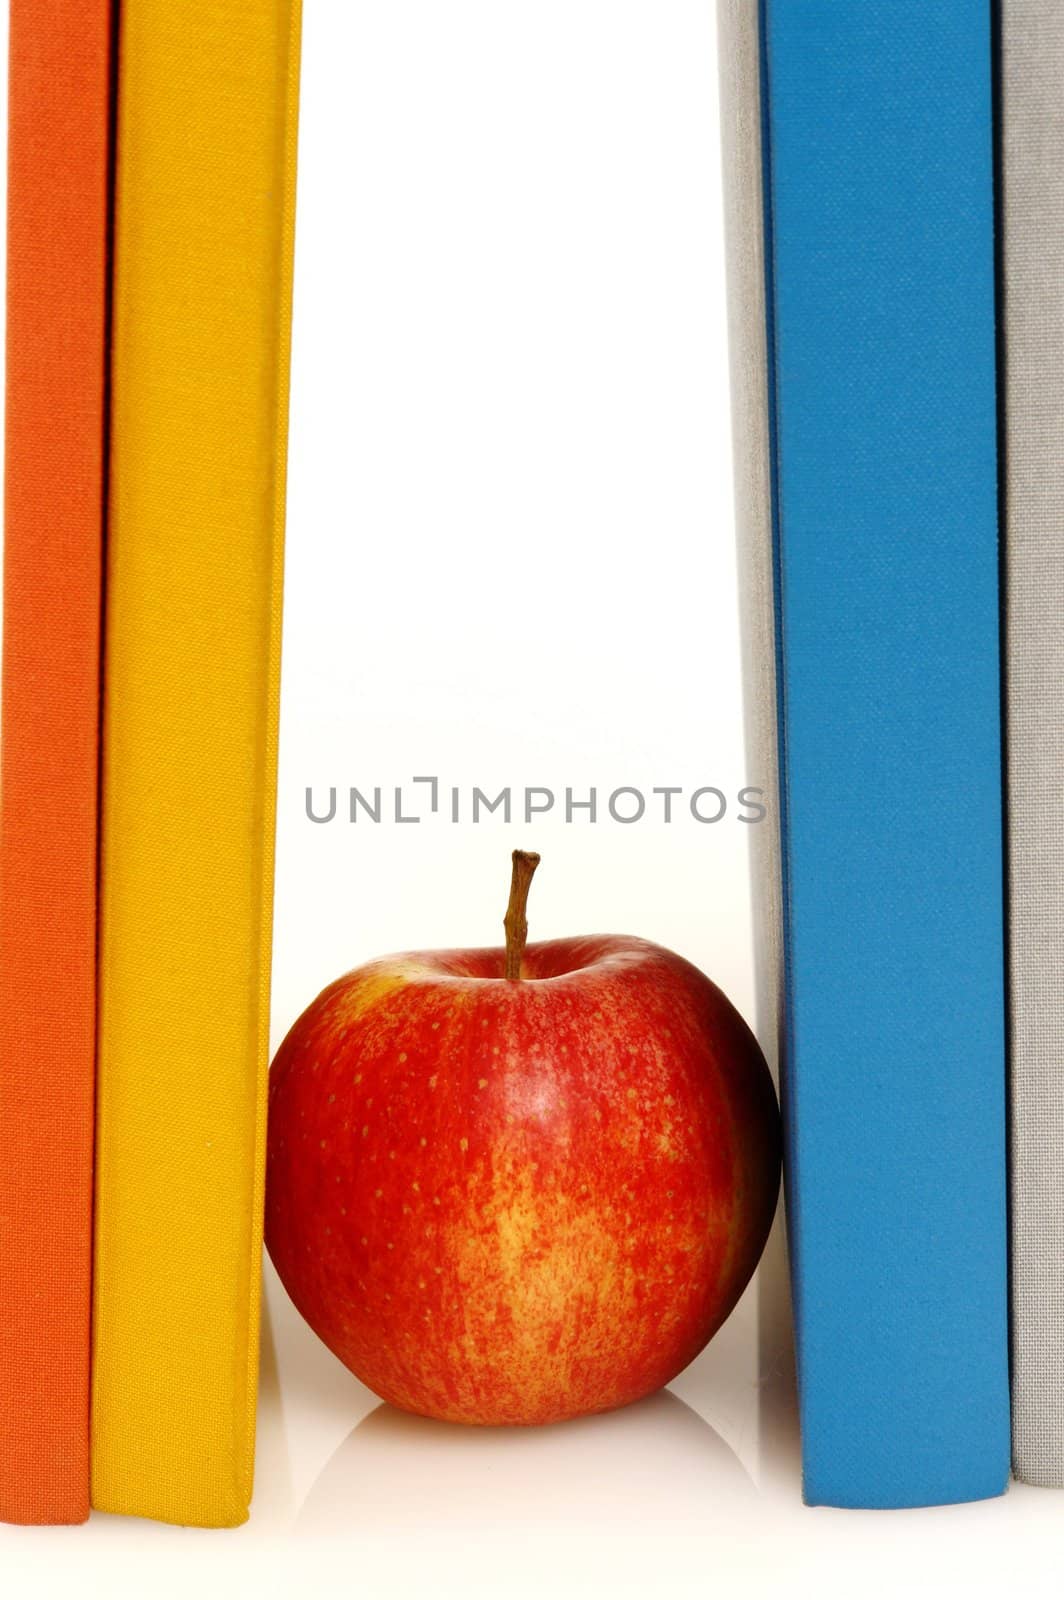 apple with books by yucas